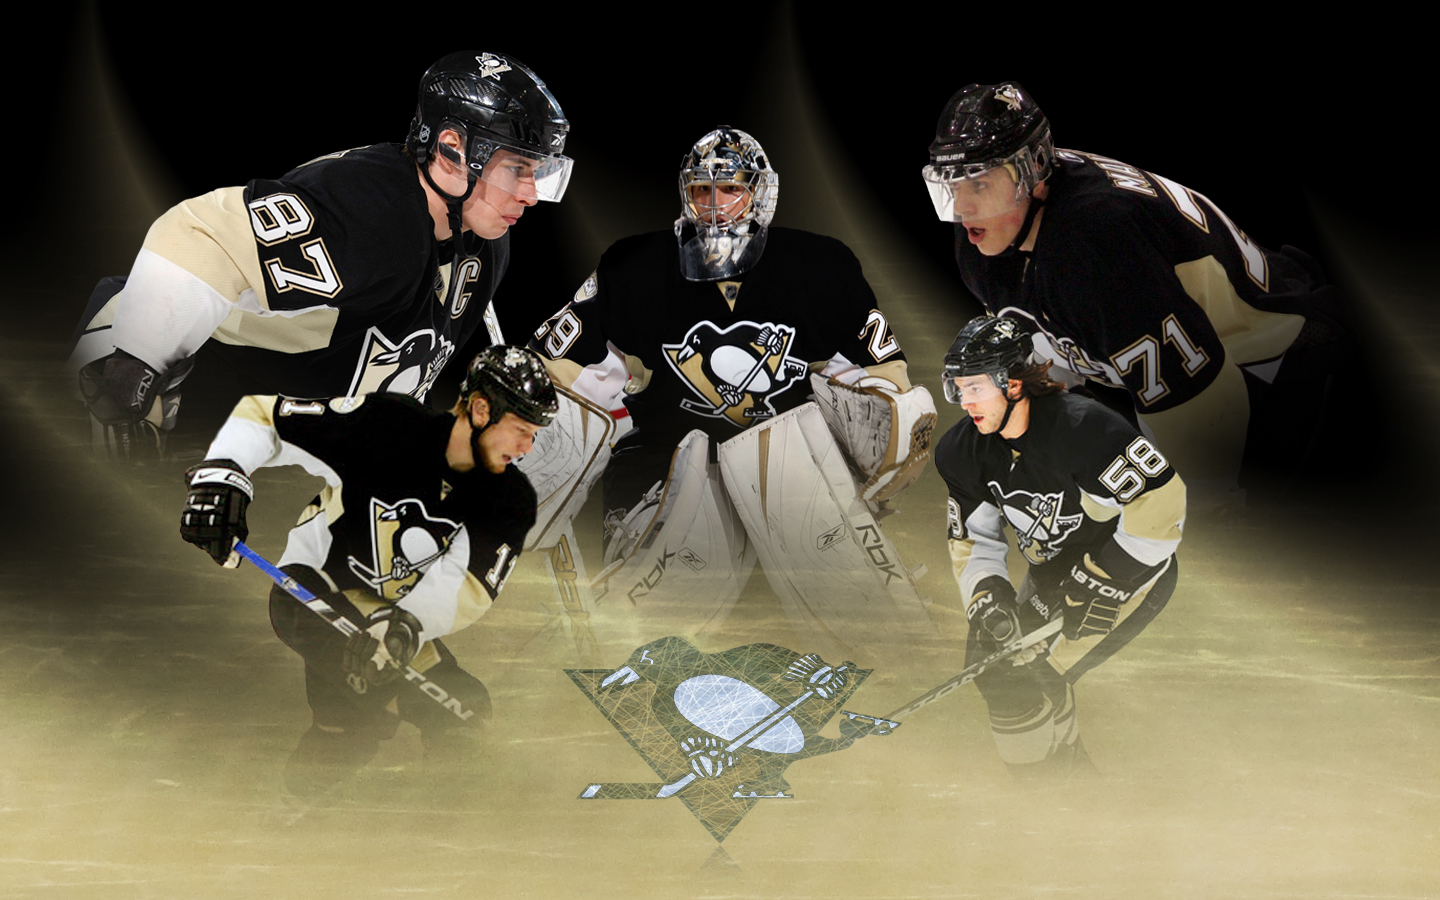 Pittsburgh Penguins wallpapers Pittsburgh Penguins background   Page 1440x900